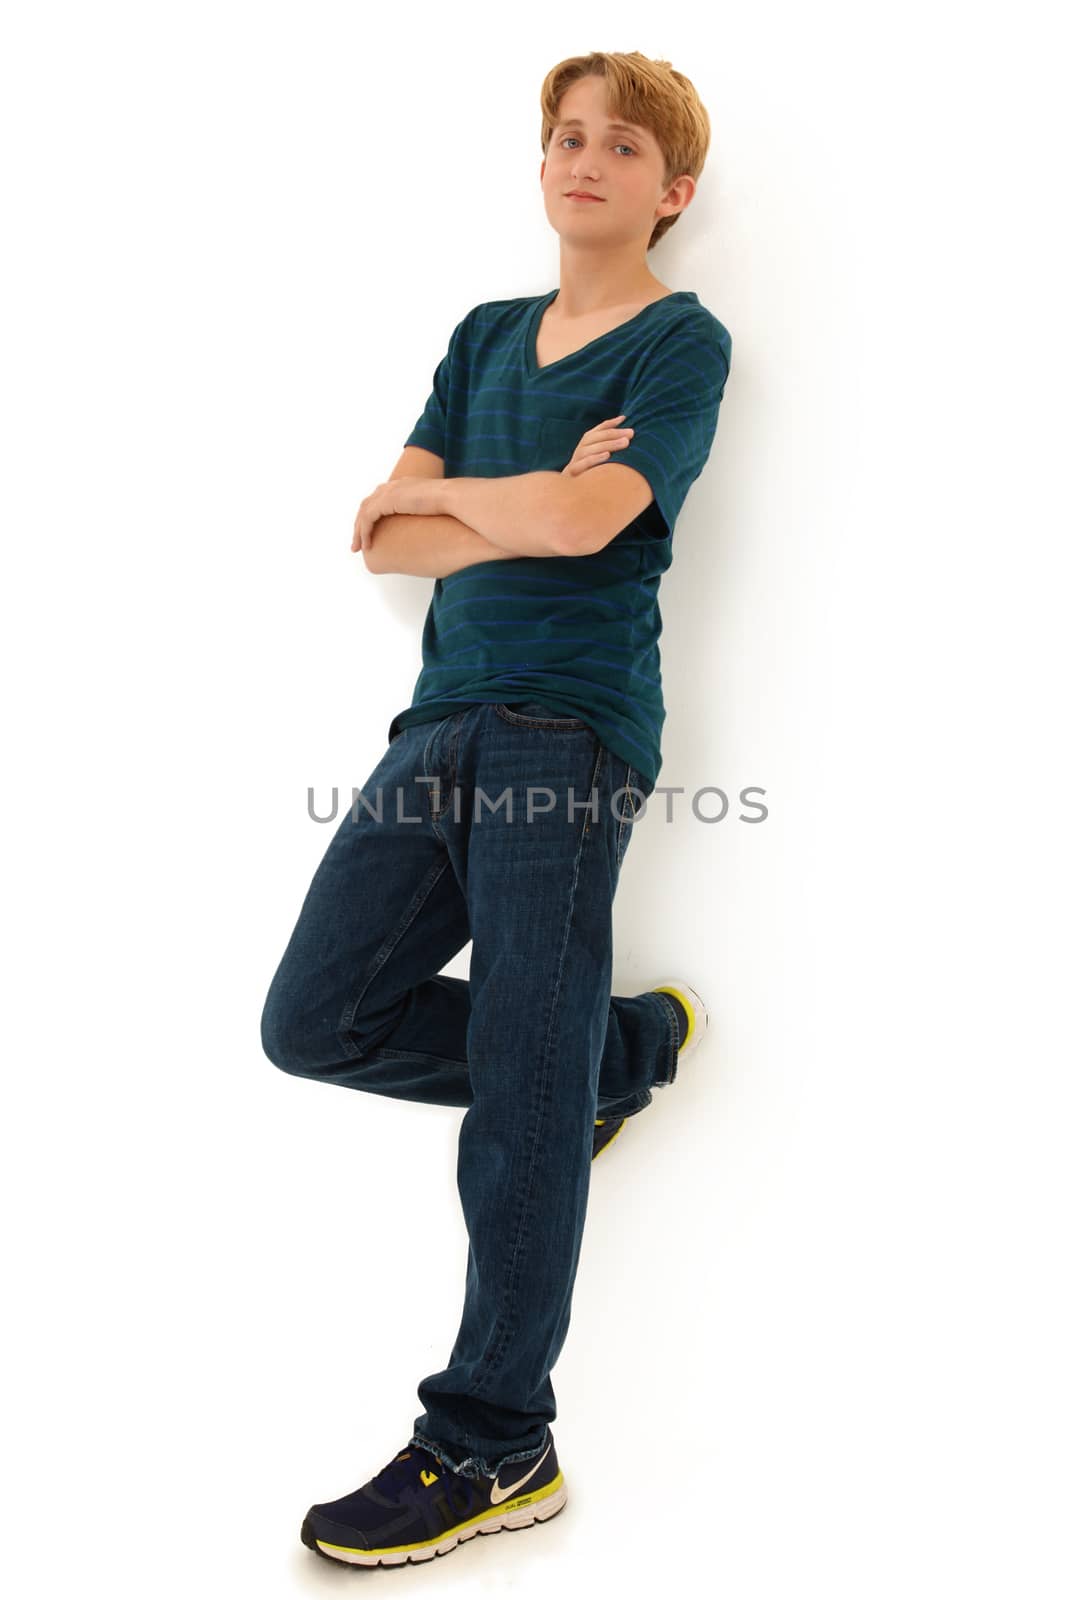 Attractive Teen Boy Leaning Against White Wall by duplass